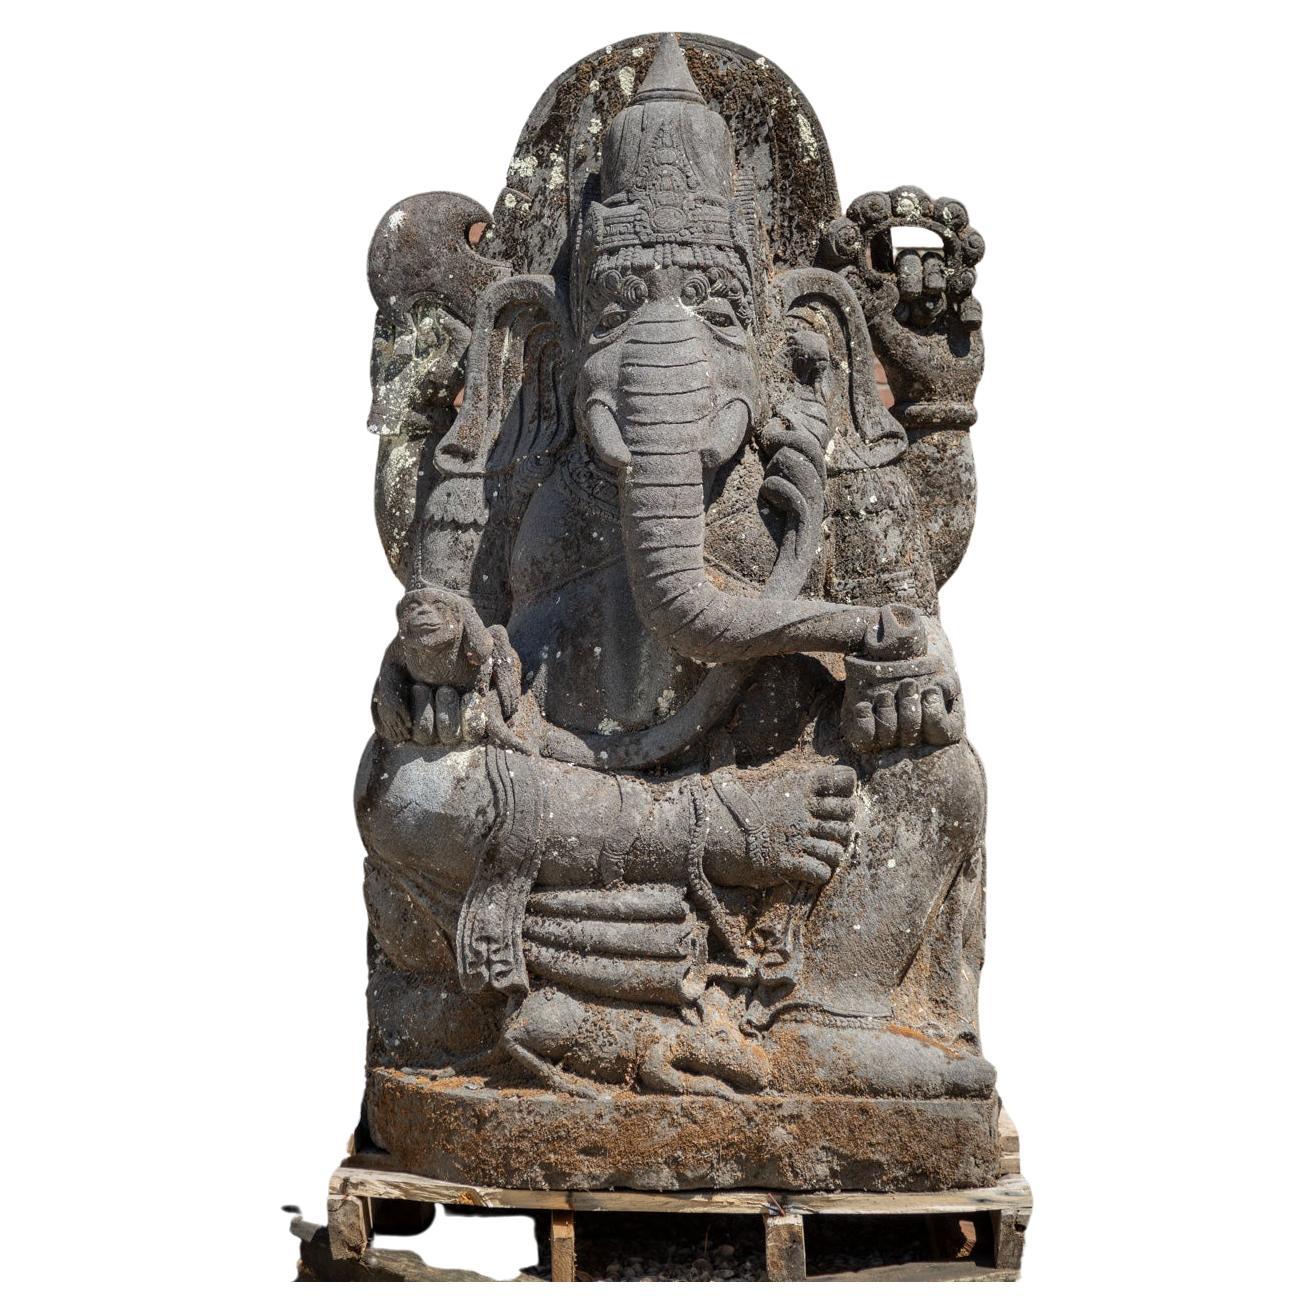 Mid 20 century very large & special old lavastone Ganesha statue from Indonesia